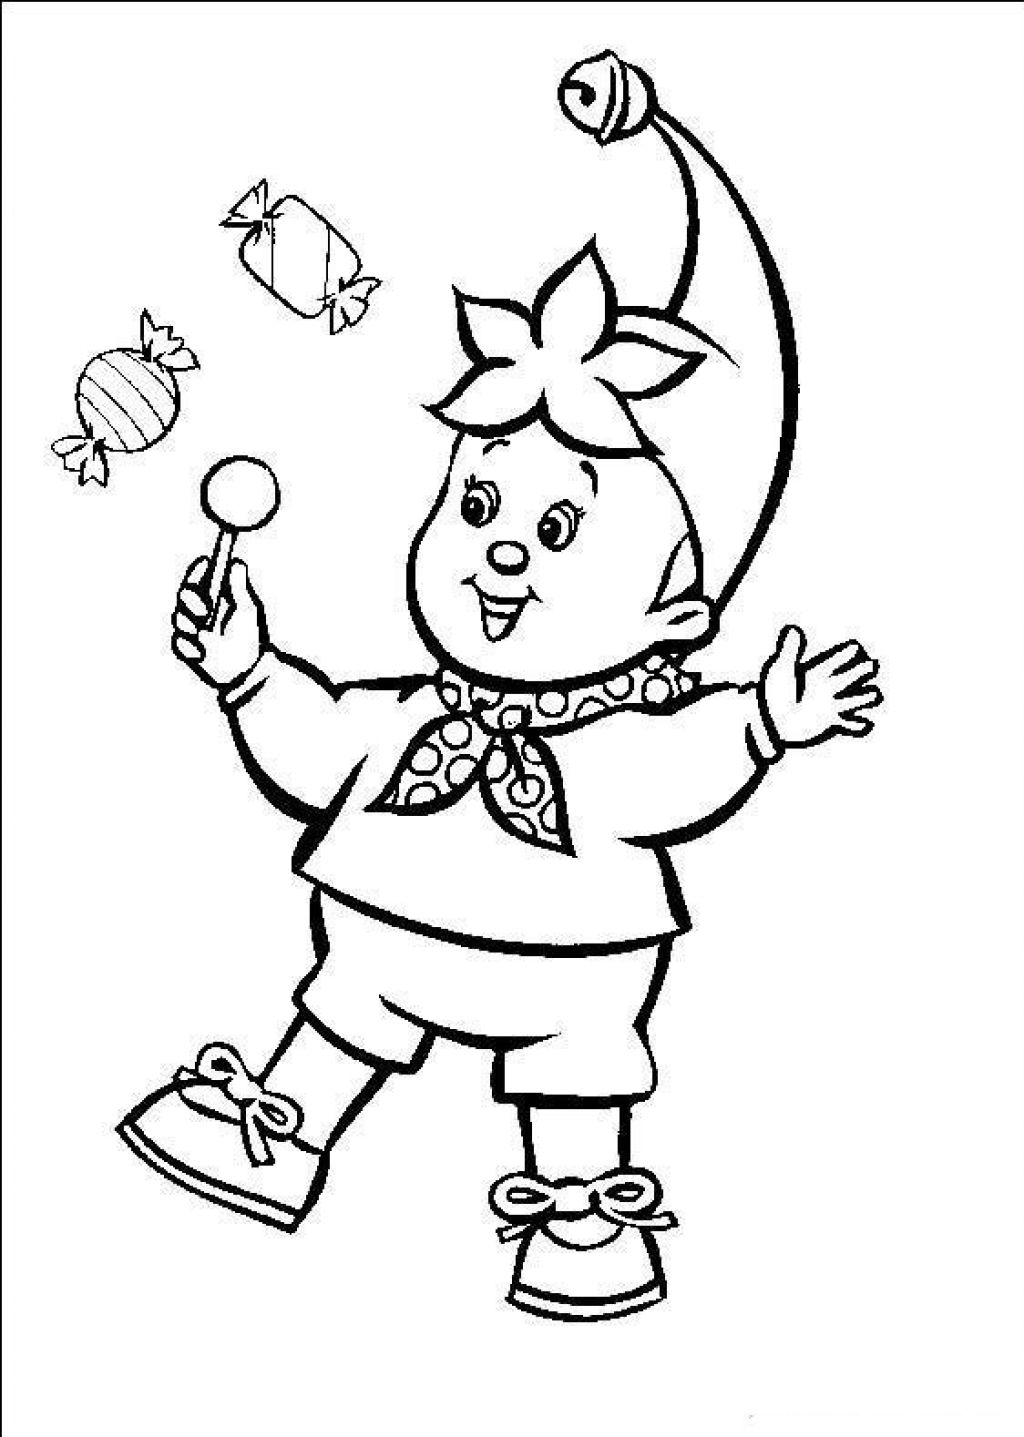 Circus Coloring Pages s